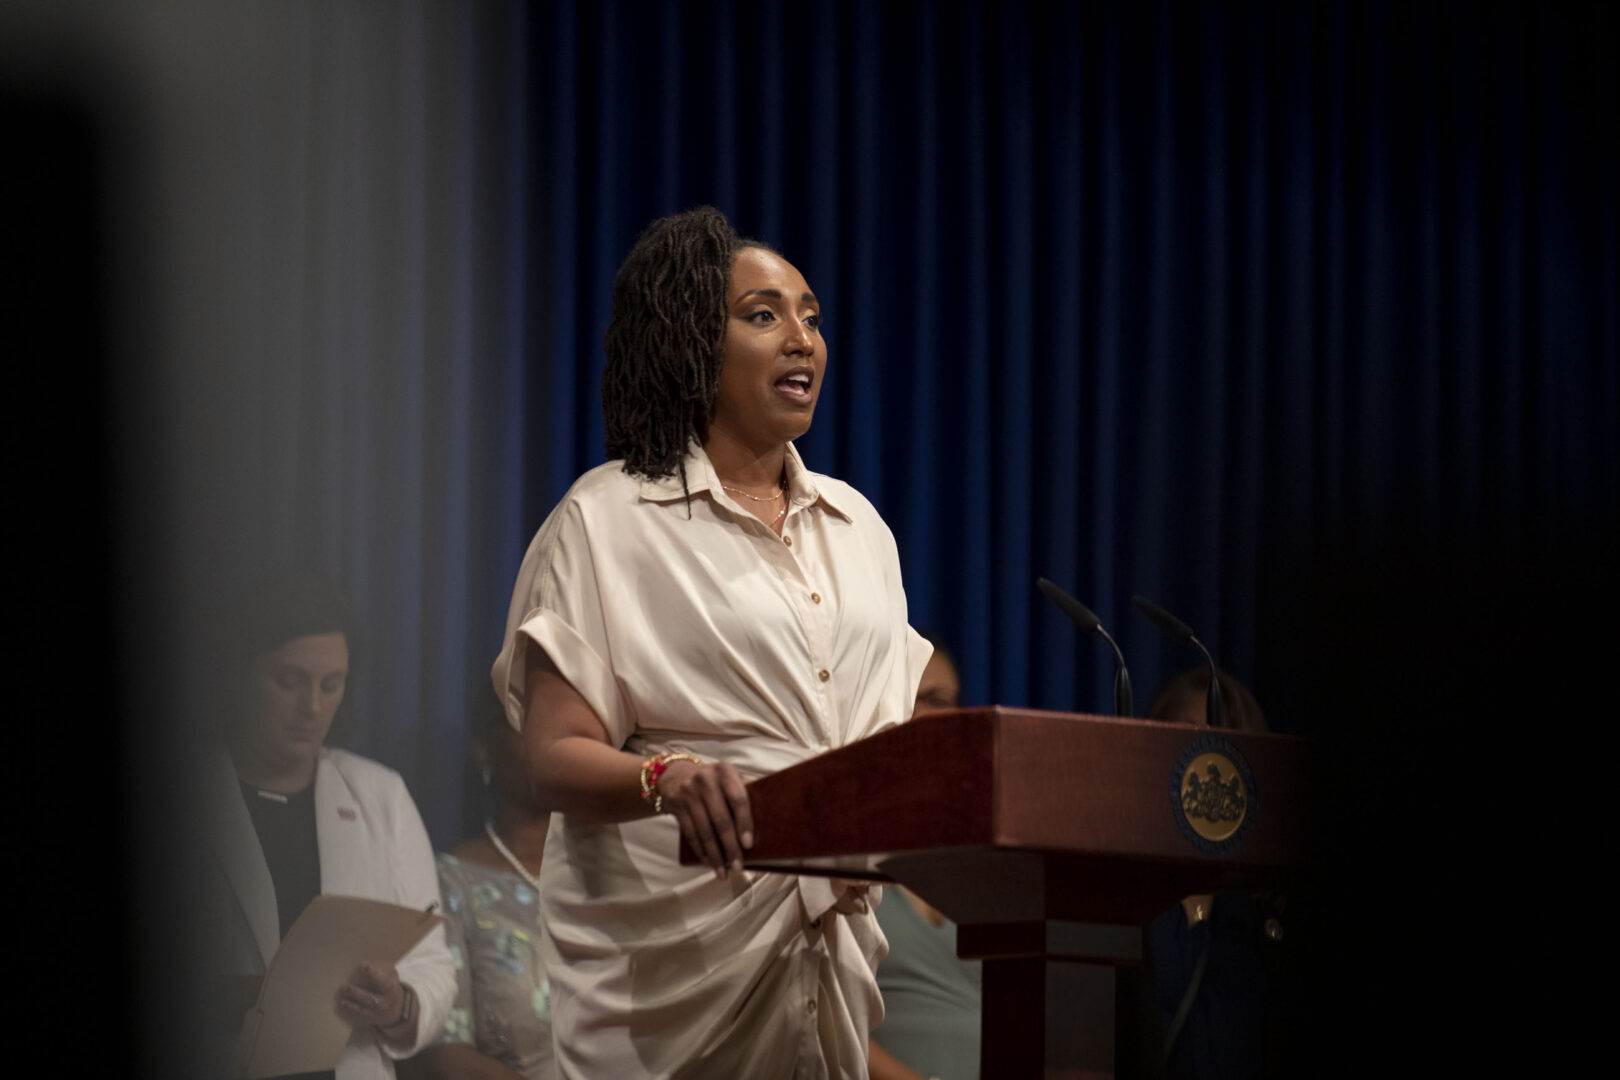 Gerria Coffee, Owner of Genesis Birth Service, discusses the importance of investing in maternal-child health, in Harrisburg, PA on May 25, 2022.